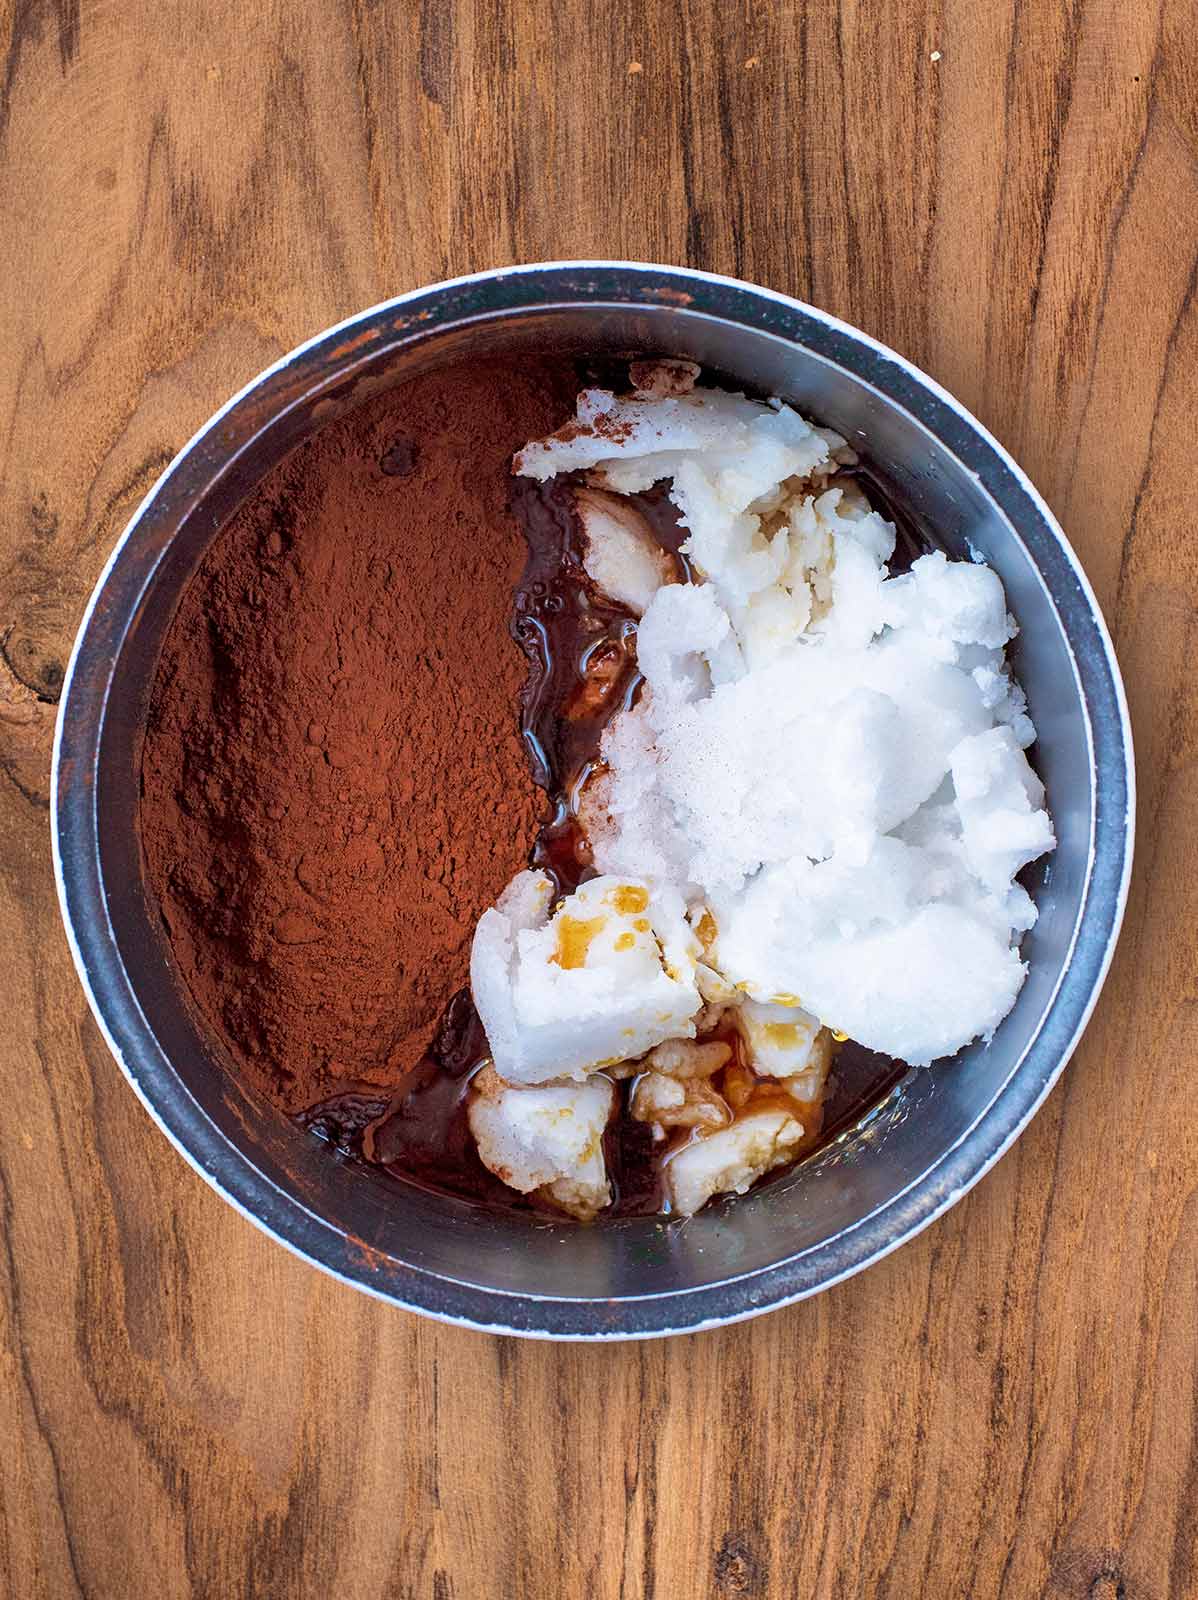 A saucepan containing coconut oil, cocoa powder and maple syrup.